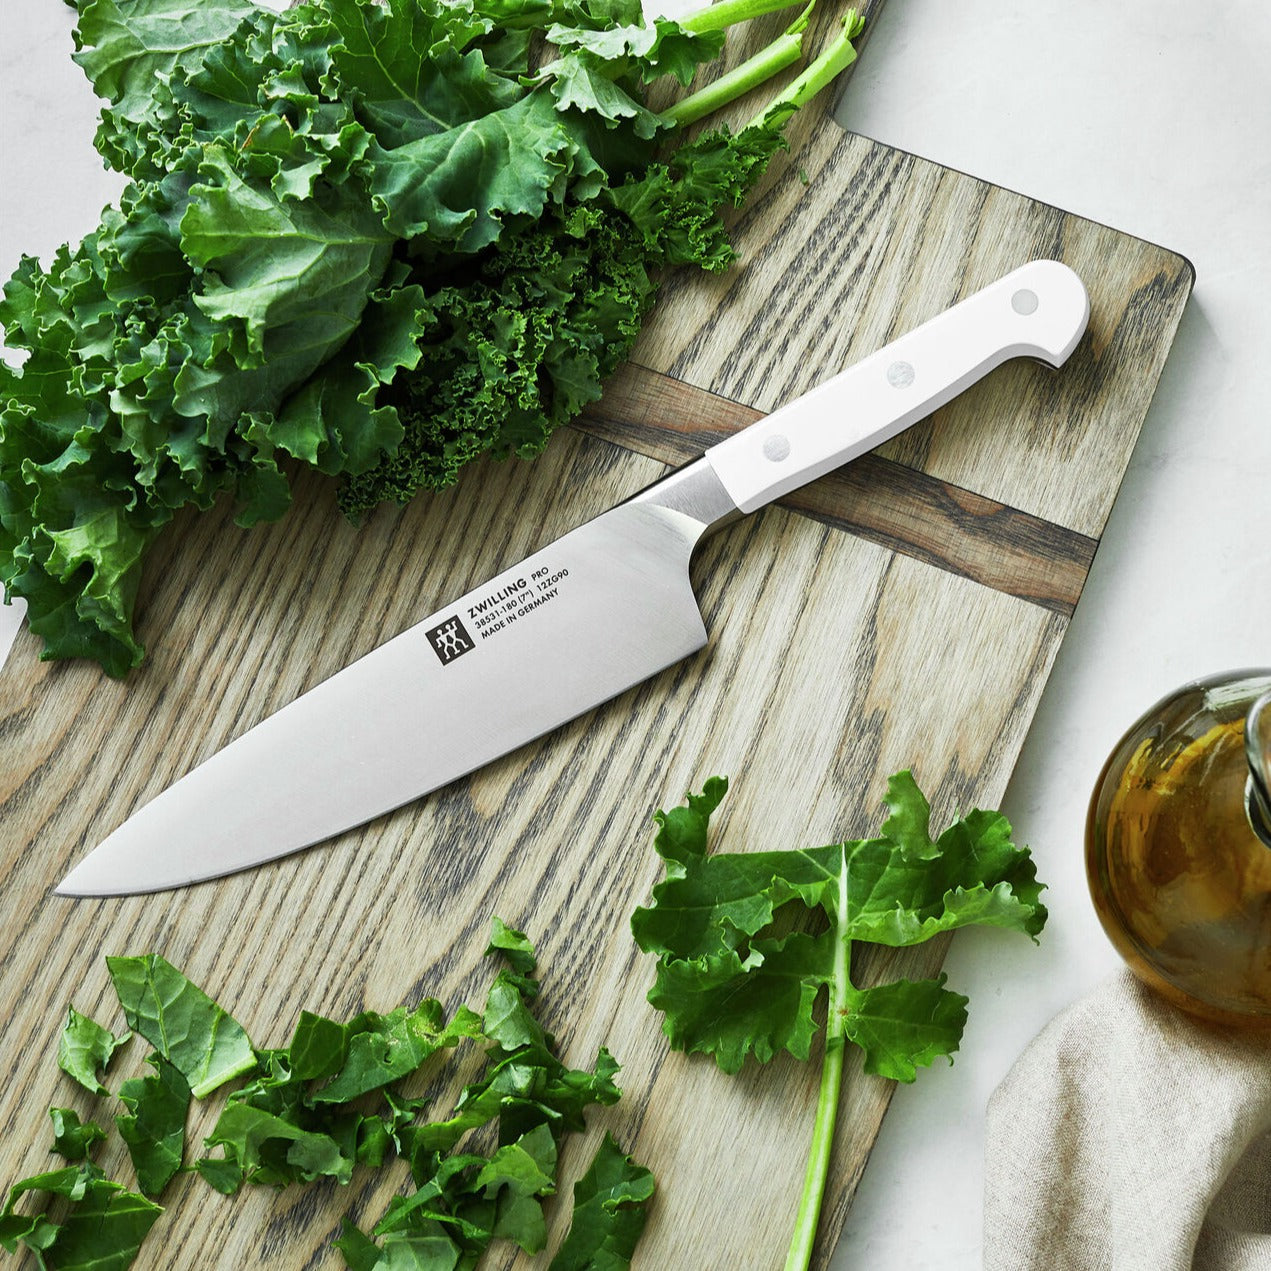 ZWILLING Pro 10 Chef's Knife